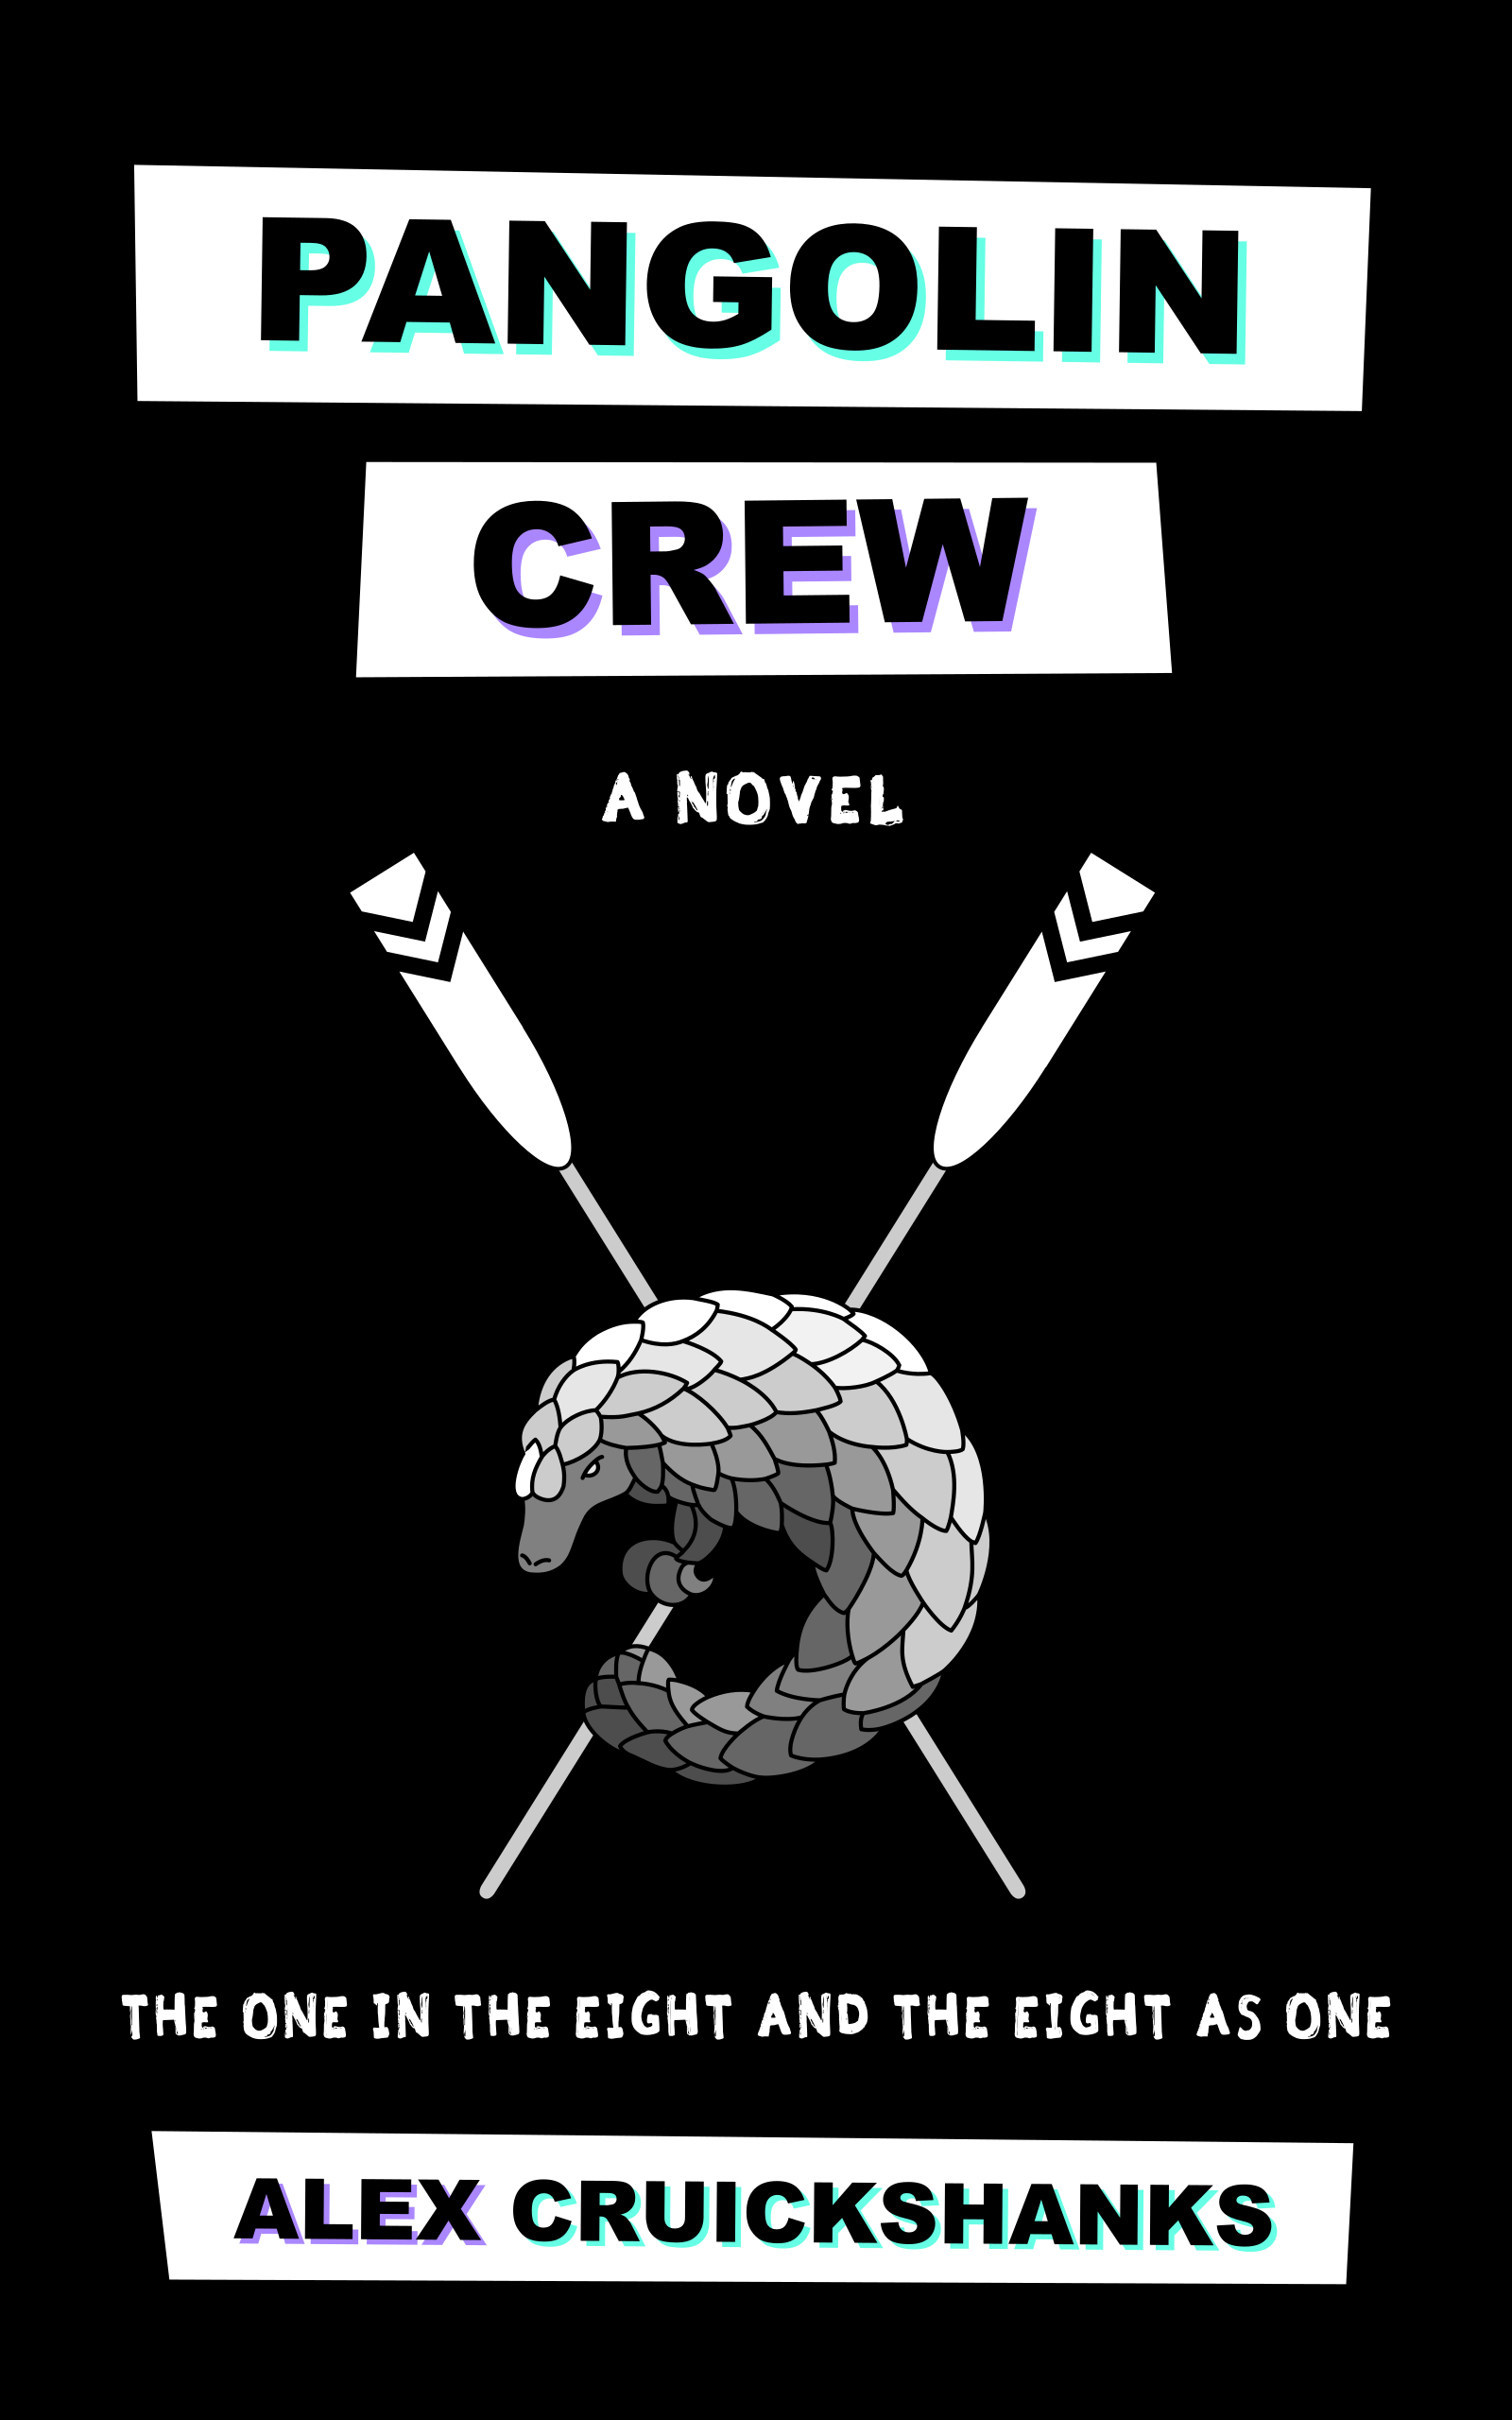 Bookcover of the pangolin crew